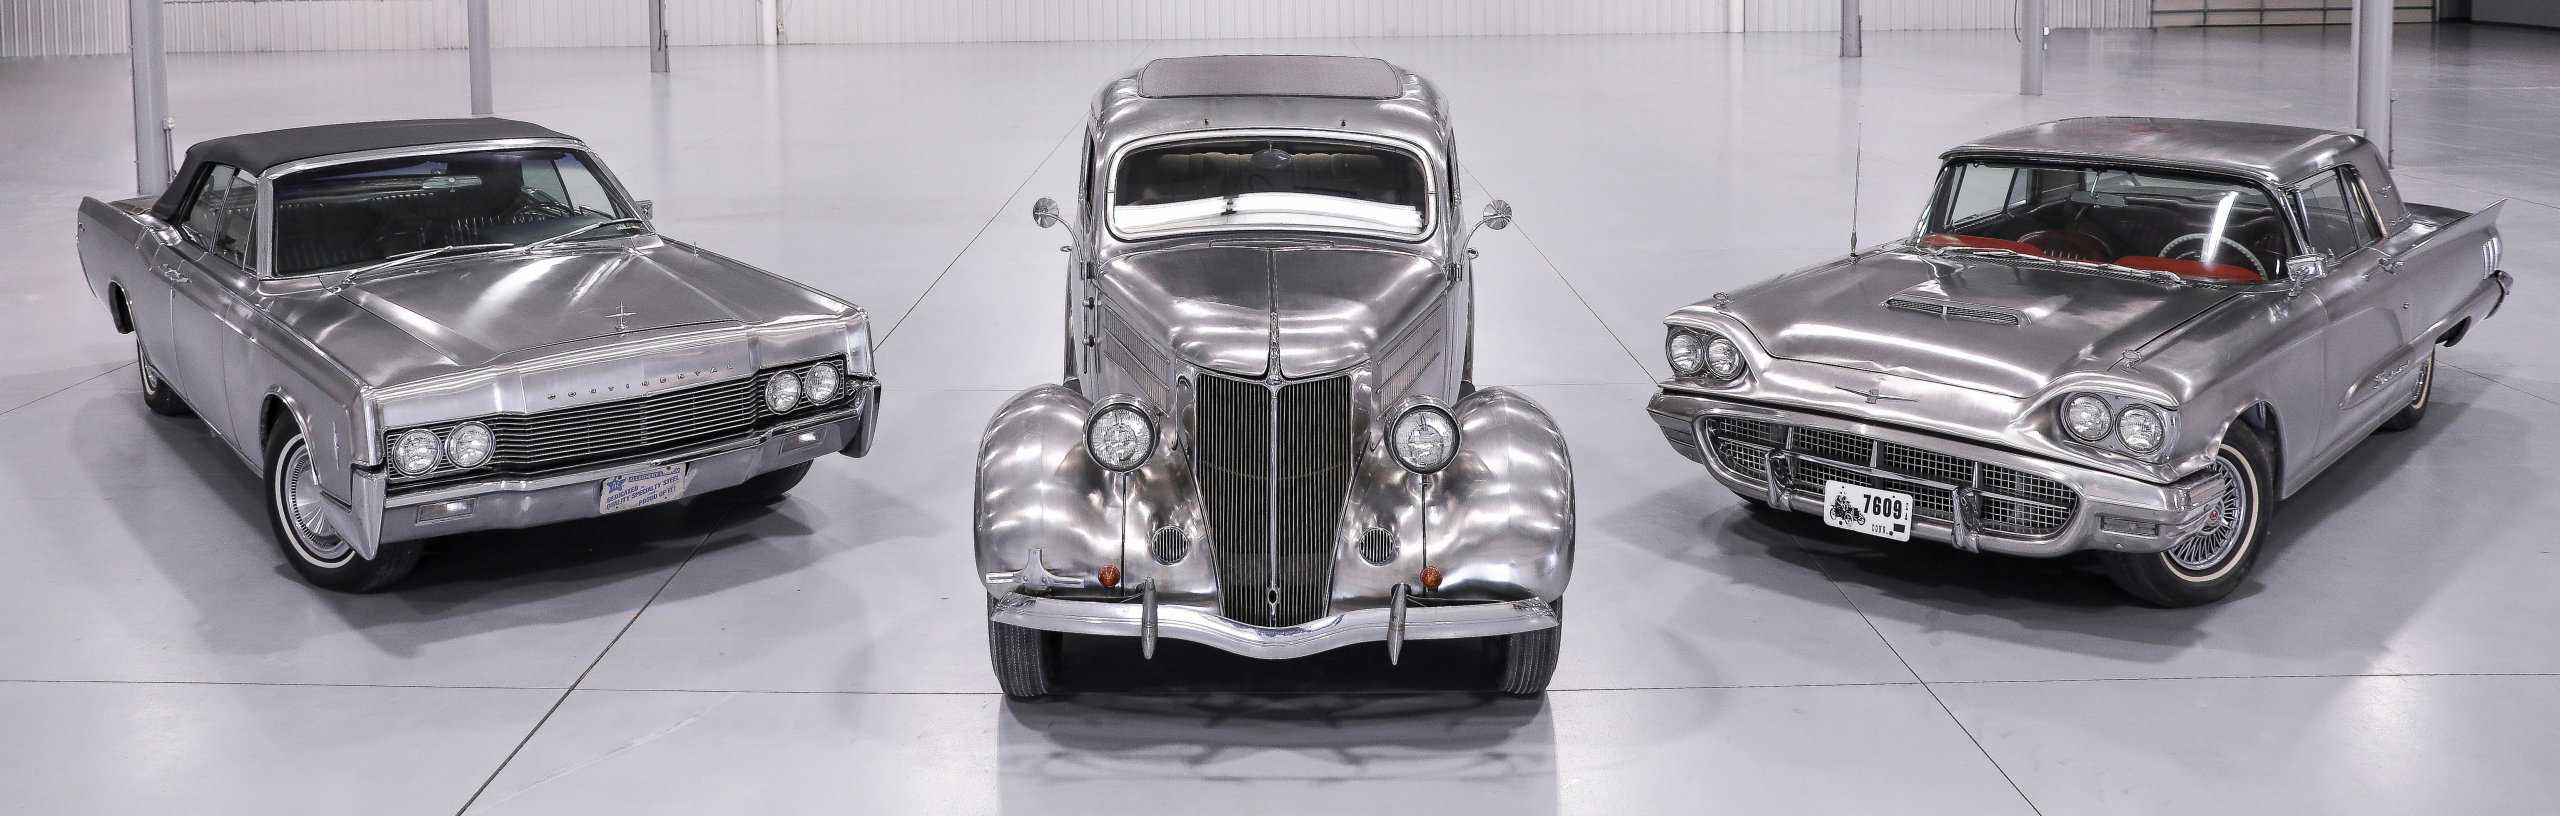 Stainless steel, Stainless-steel Ford trio consigned to Worldwide sale, ClassicCars.com Journal